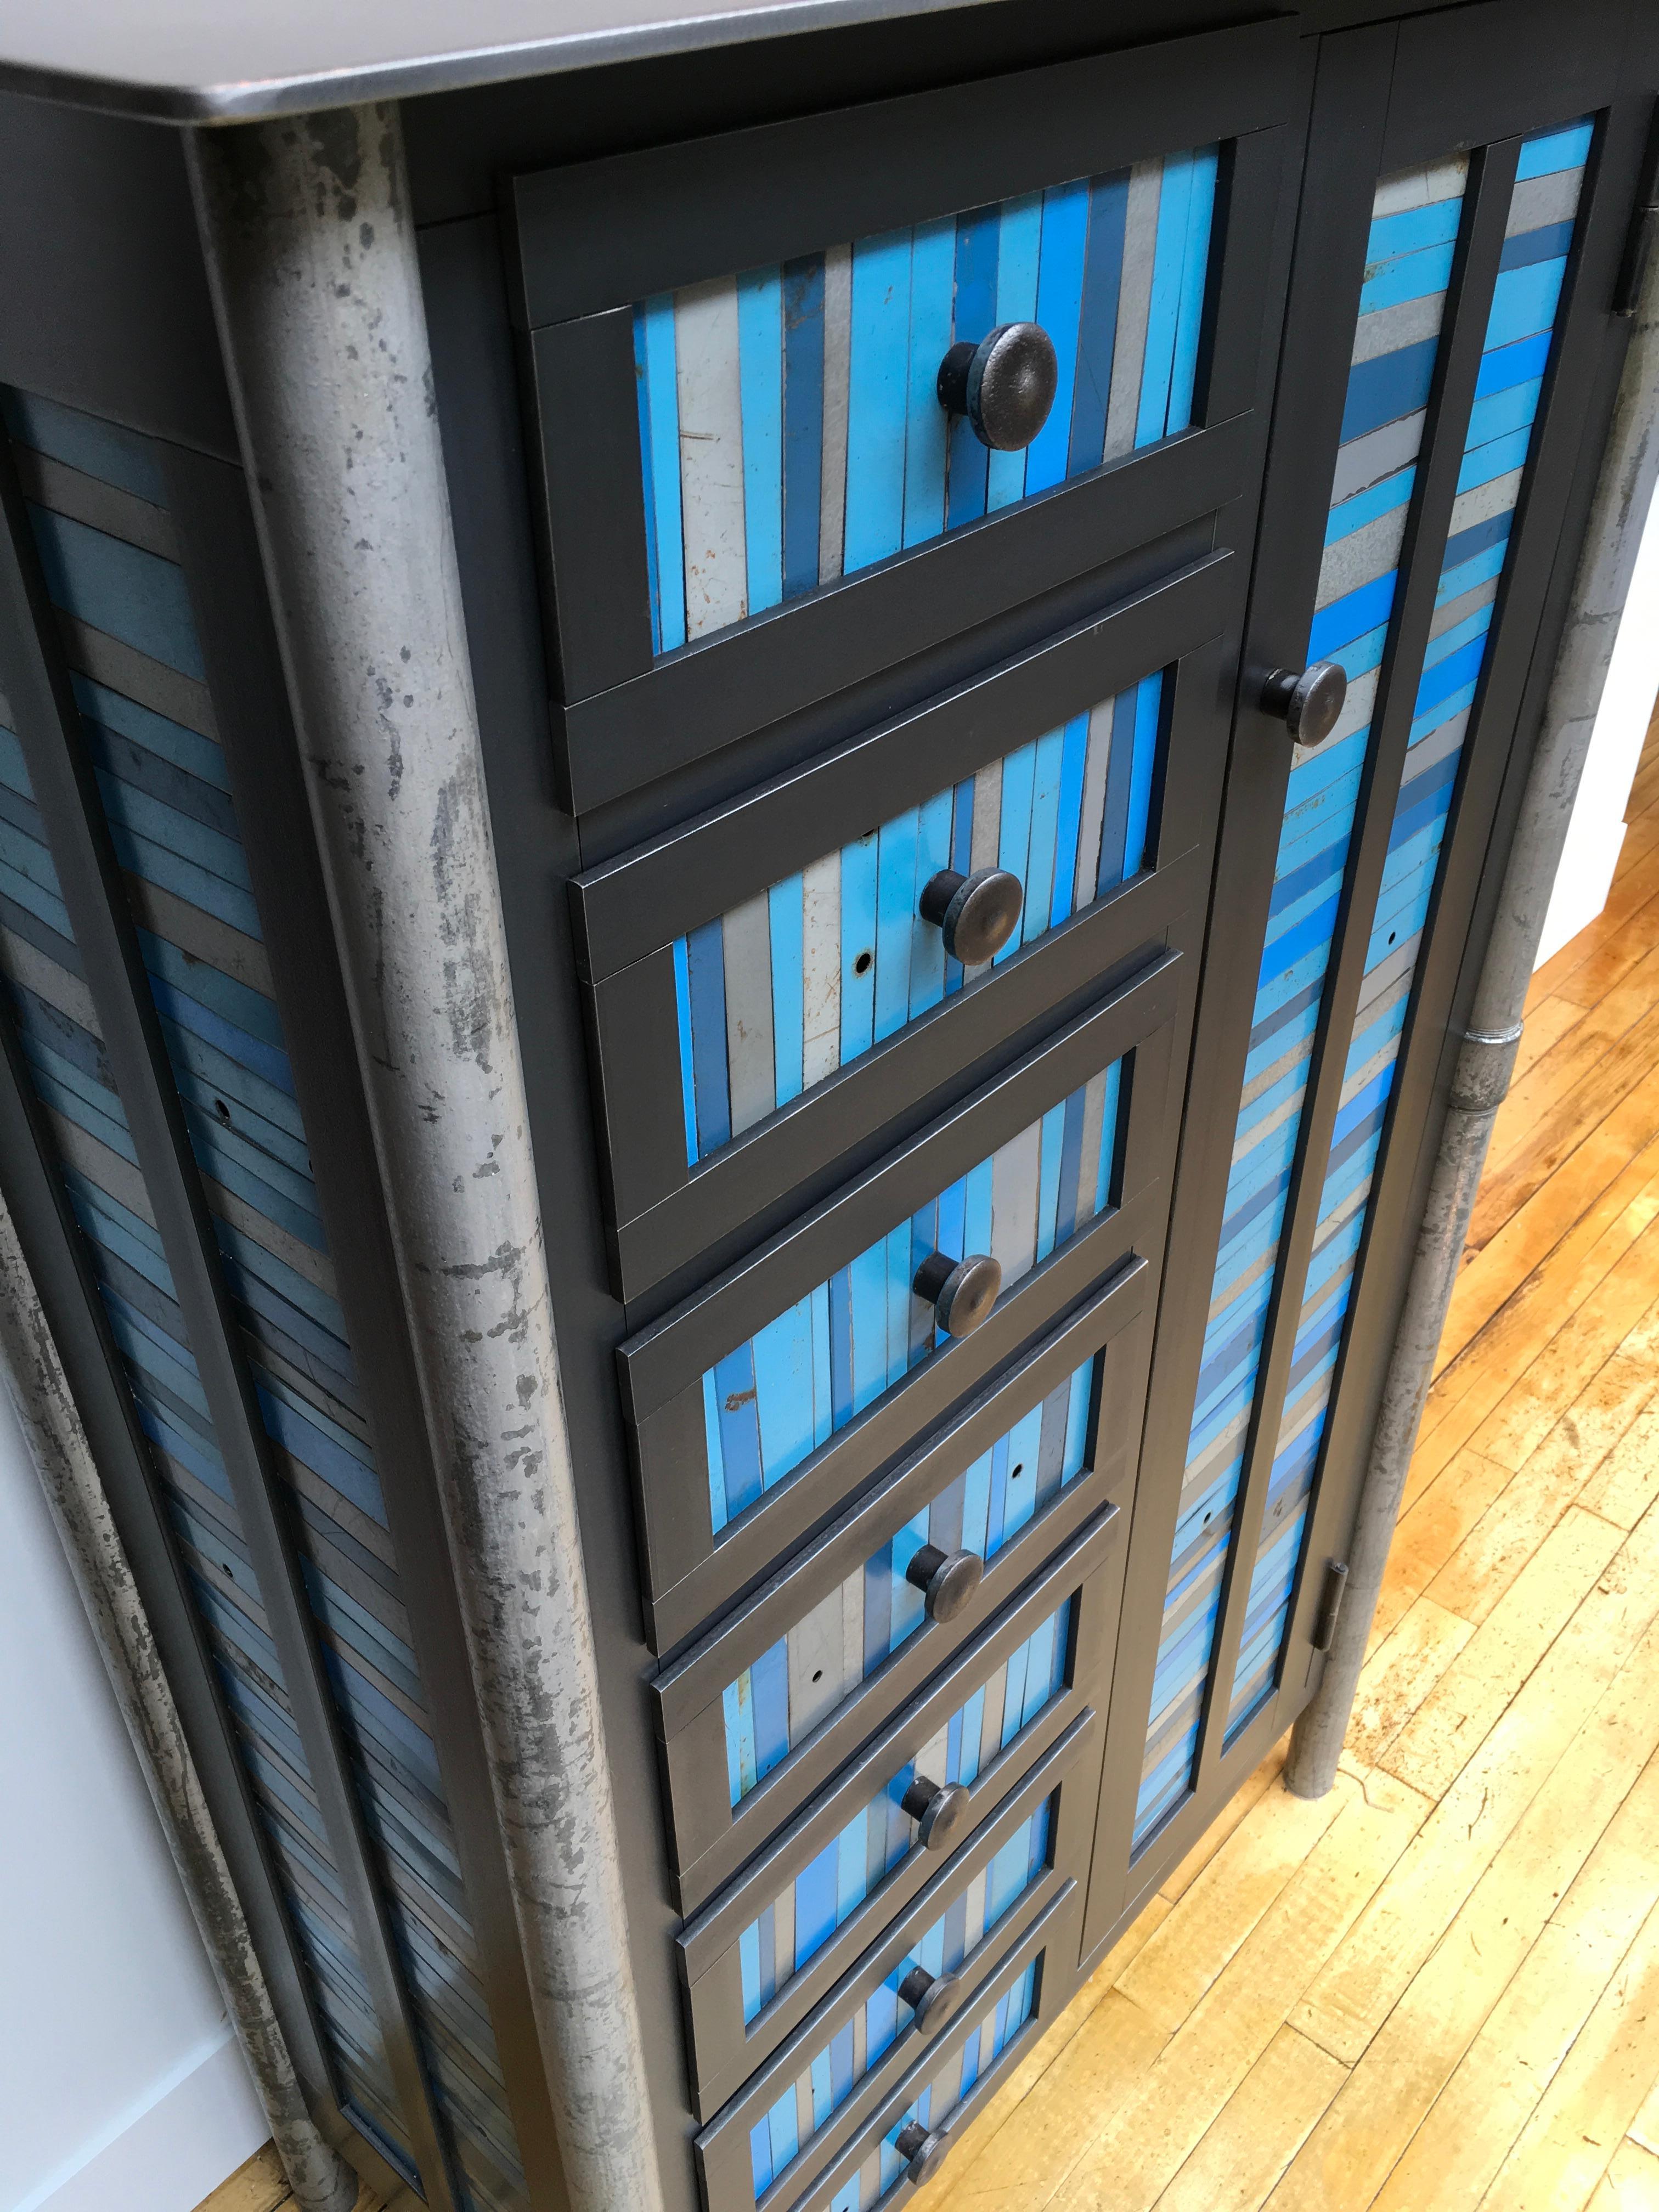 This is a totally functional industrial modern cabinet and case of seven drawers. There are two interior shelves inside the cabinet. It created from hot-rolled steel and found painted panels. The legs are made from salvaged pipe. The panels on the